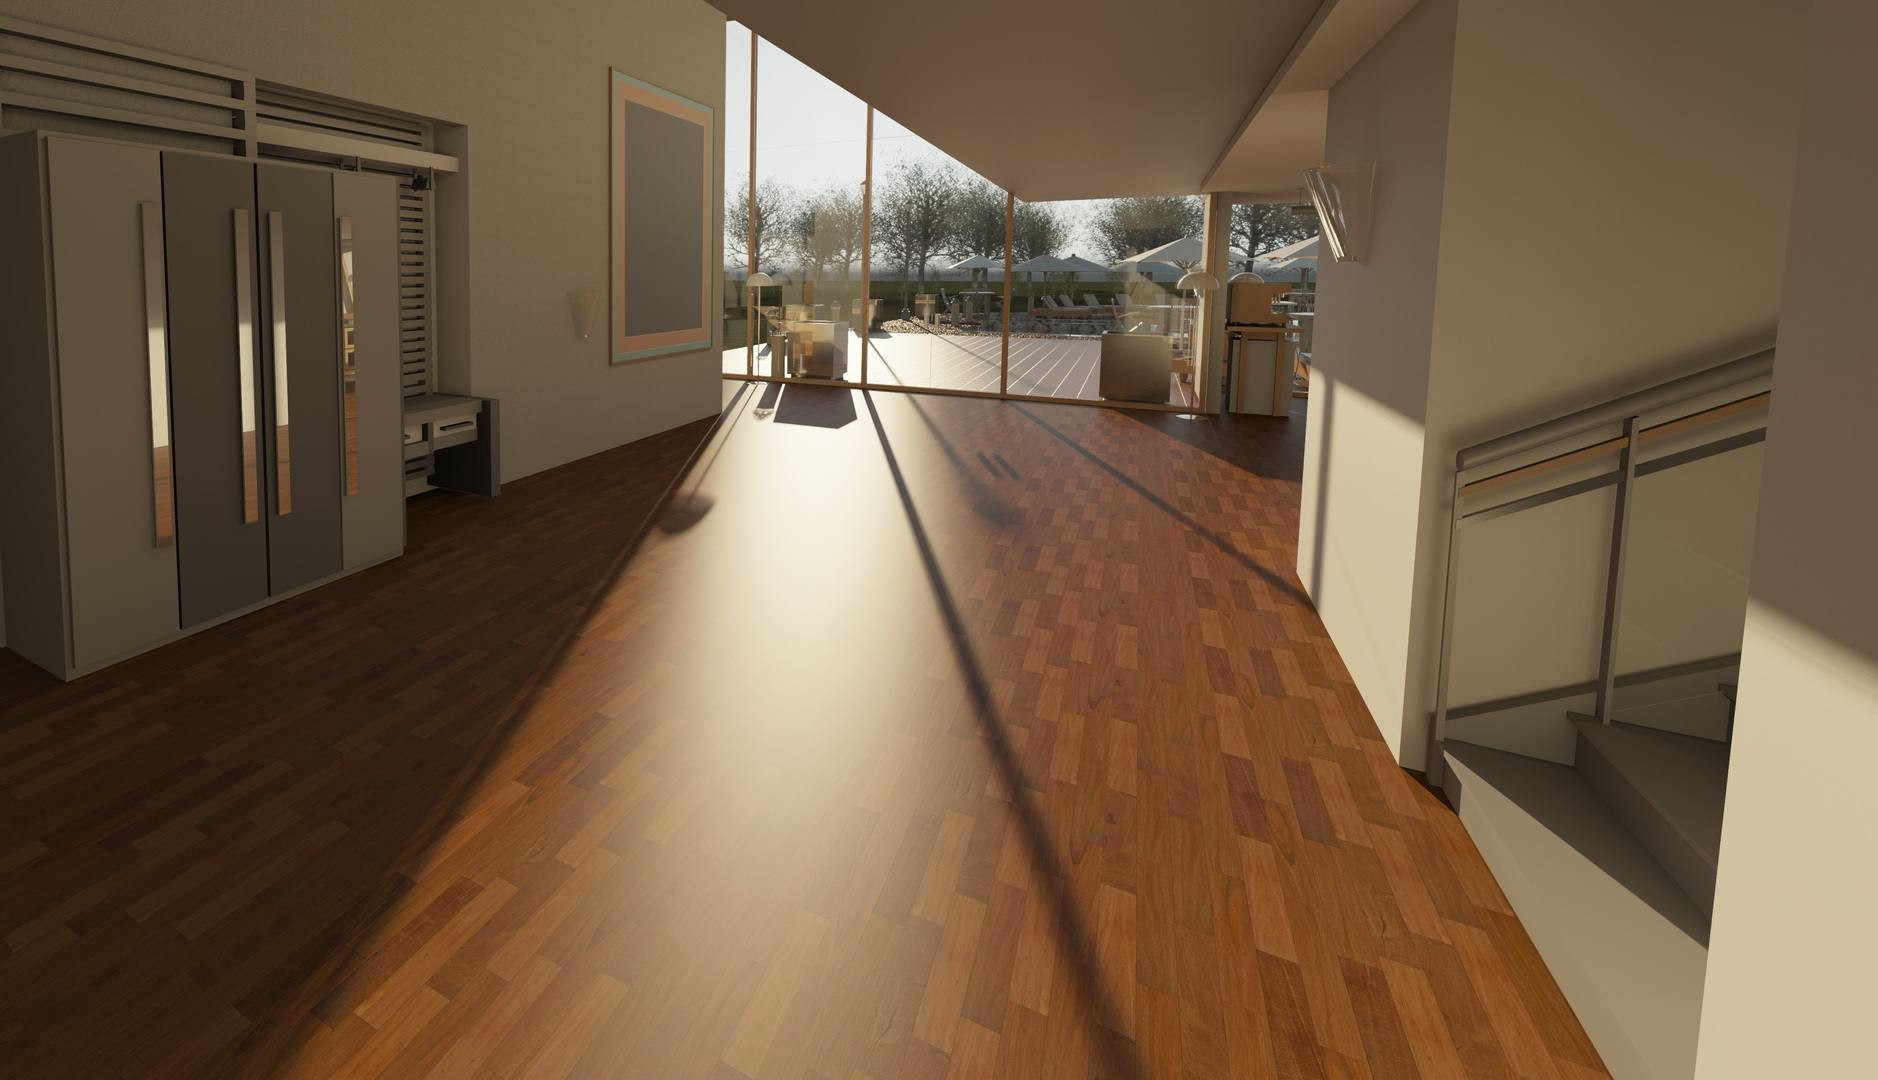 20 Stunning Hardwood Floor Sanding Cost Per Square Foot 2024 free download hardwood floor sanding cost per square foot of common flooring types currently used in renovation and building intended for architecture wood house floor interior window 917178 pxhere com 5b